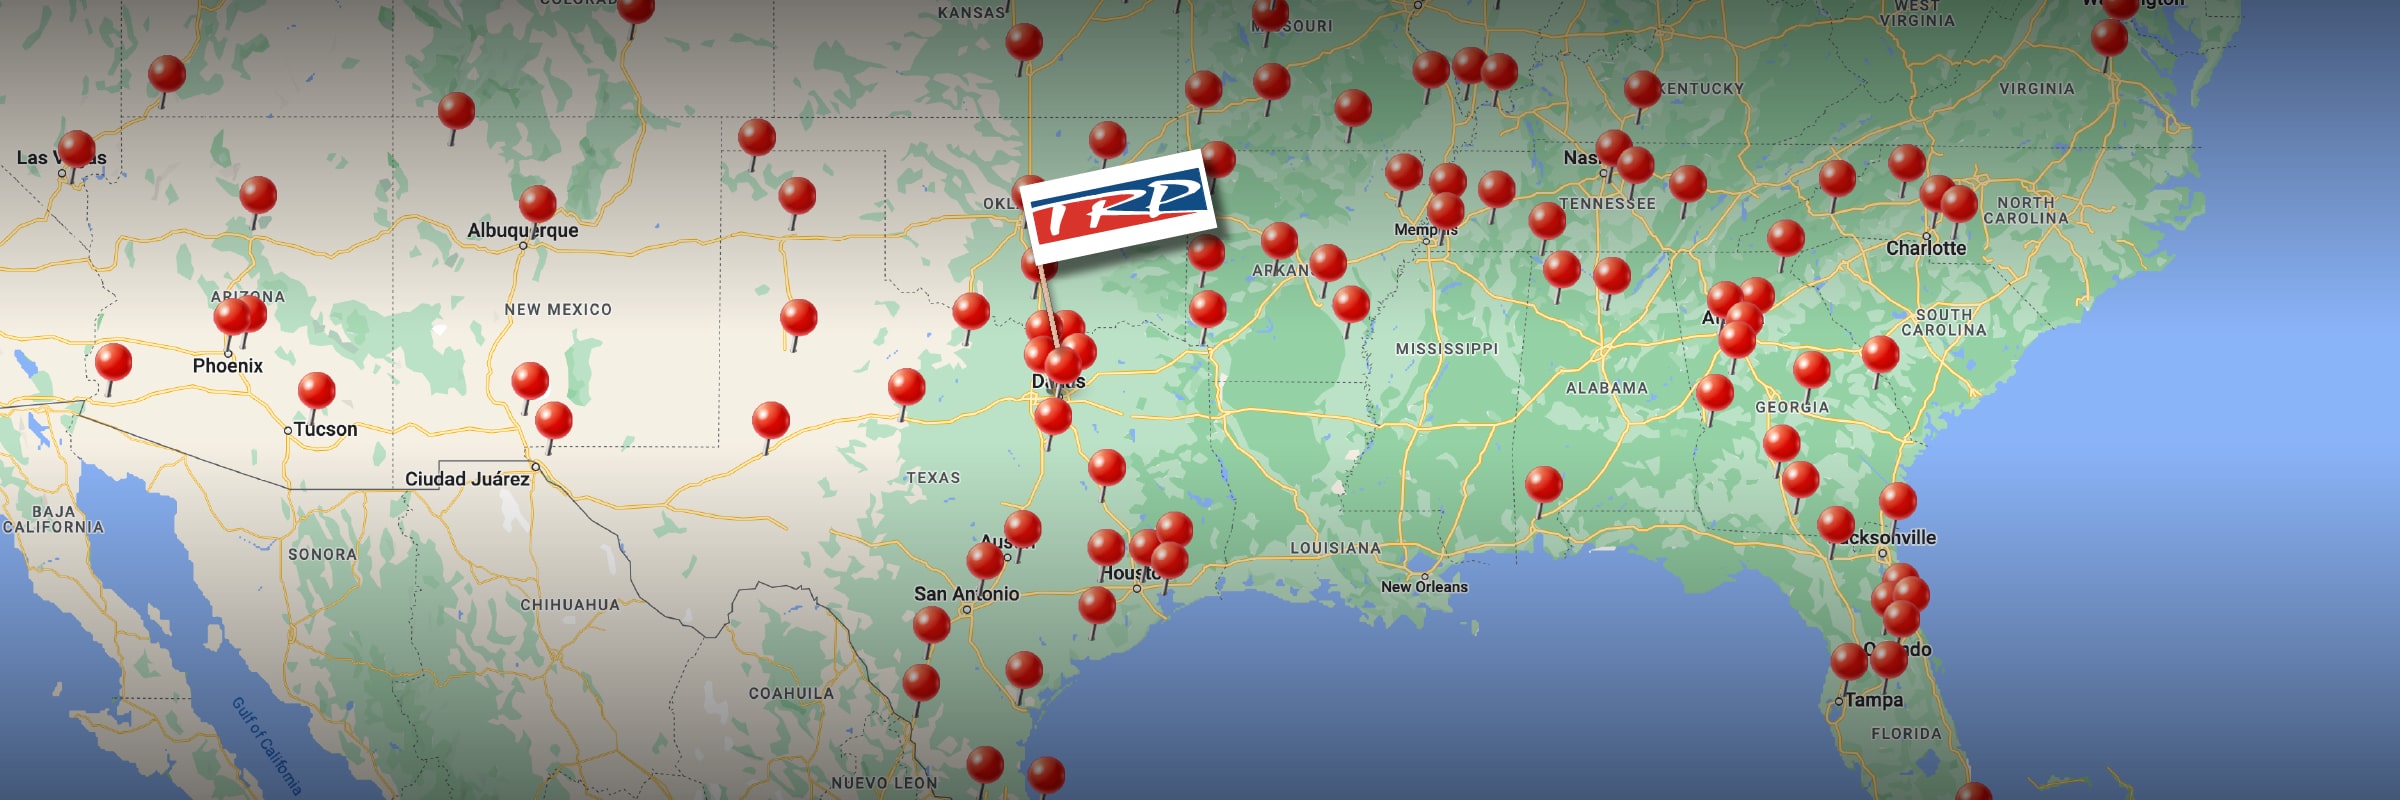 Map of US with TRP flag pinned to Dallas, TX